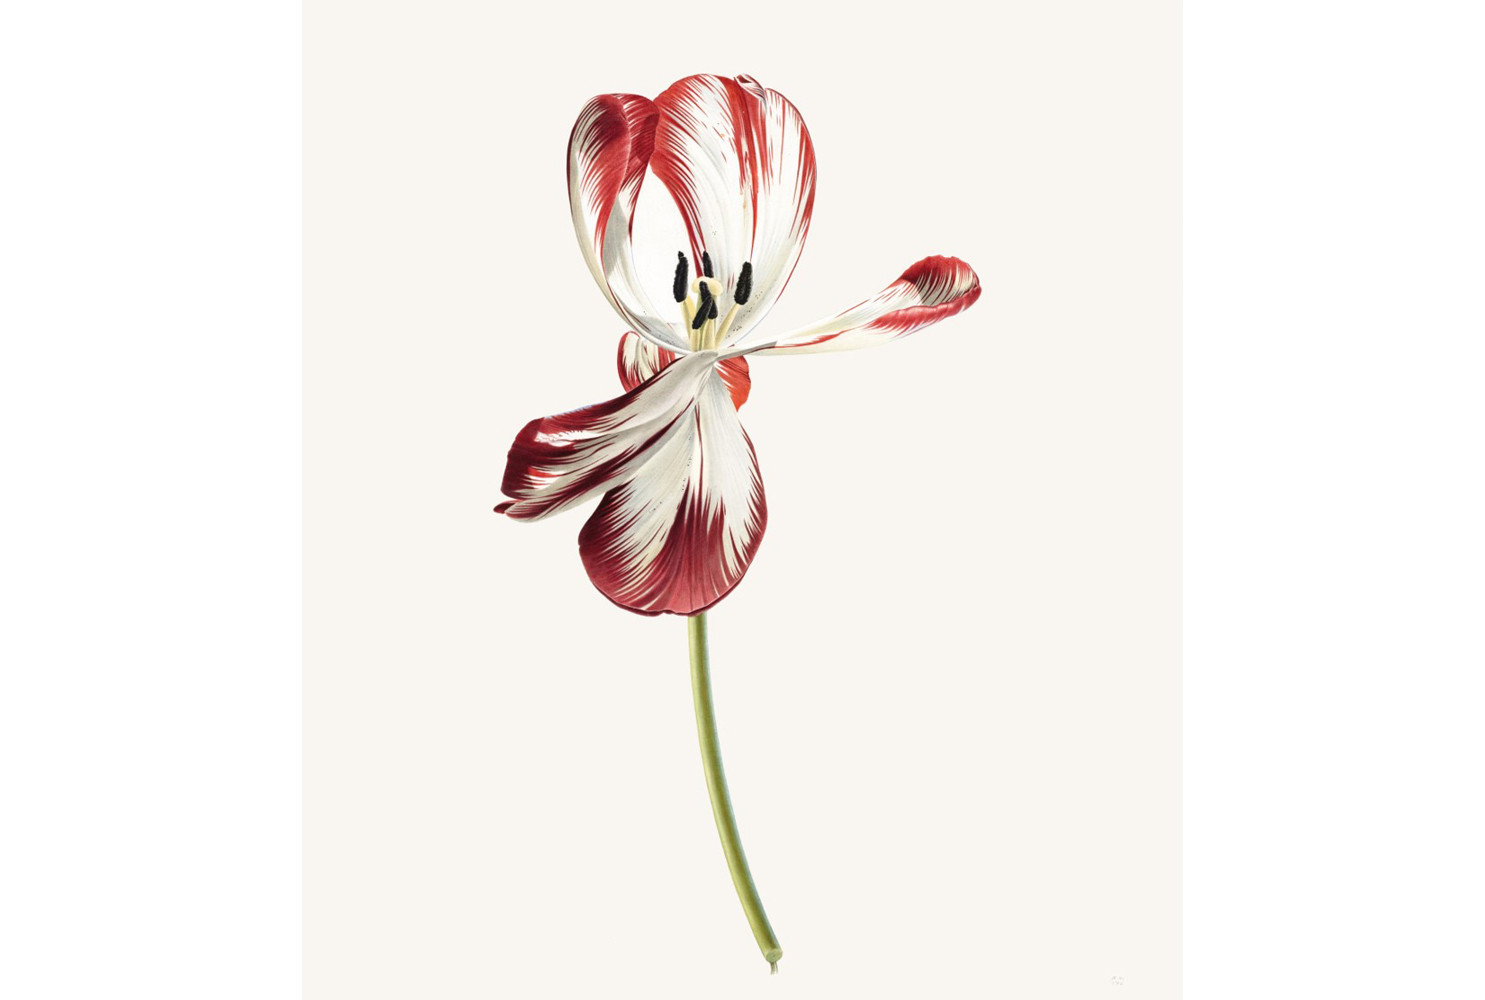 Dying Tulip I, 1976, by Rory McEwen (Scottish, 1932 – 1982). Watercolor on vellum, 30.75 x 26.75 inches. Loan courtesy of a private collection. ©2023 Estate of Rory McEwen